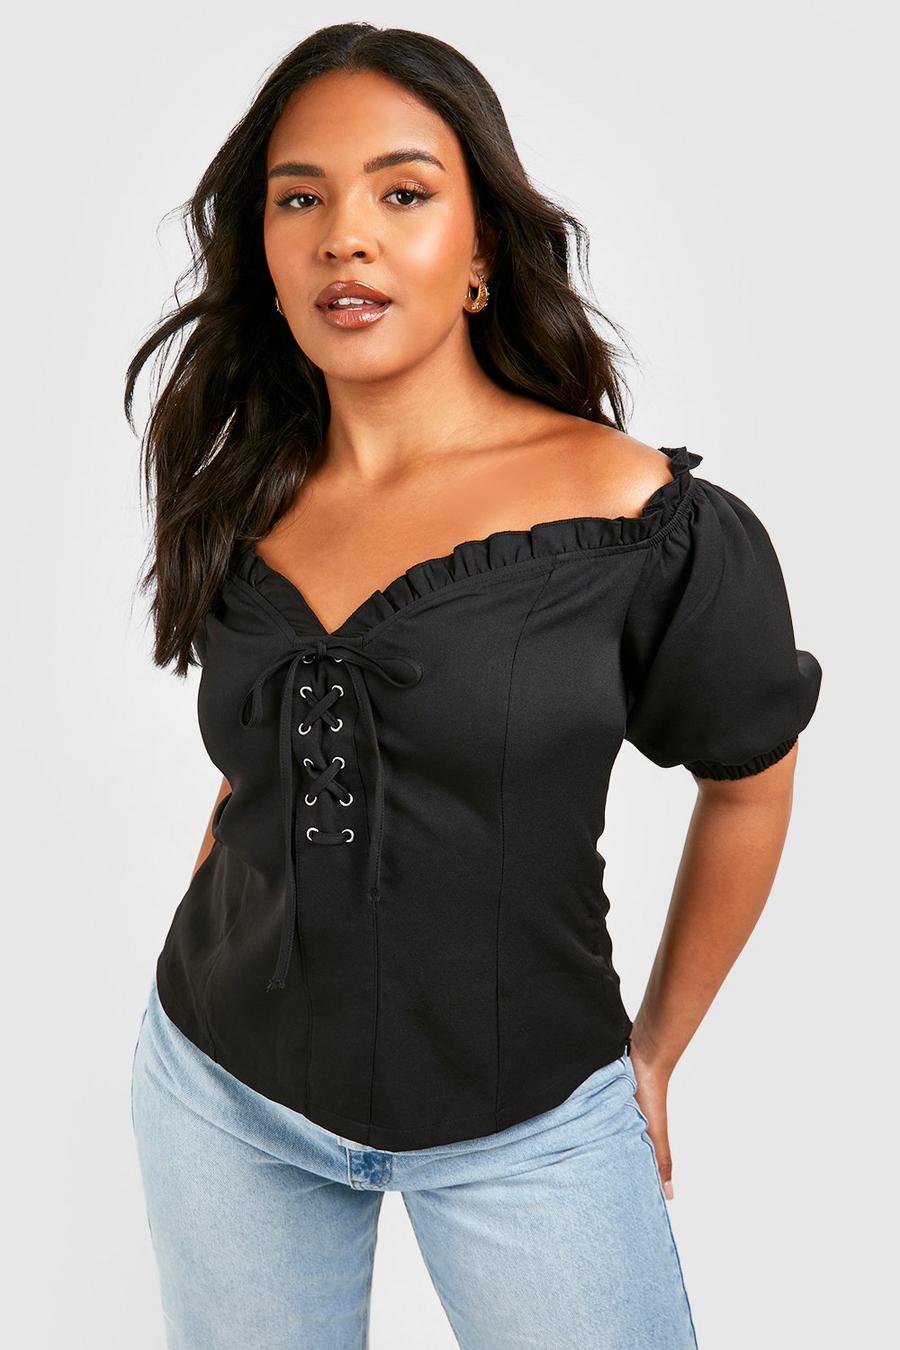 Tops for Women Plus Size Summer Off Shoulder Flare Long Sleeve Tunic Crop Top Elegant Casual Blouse 